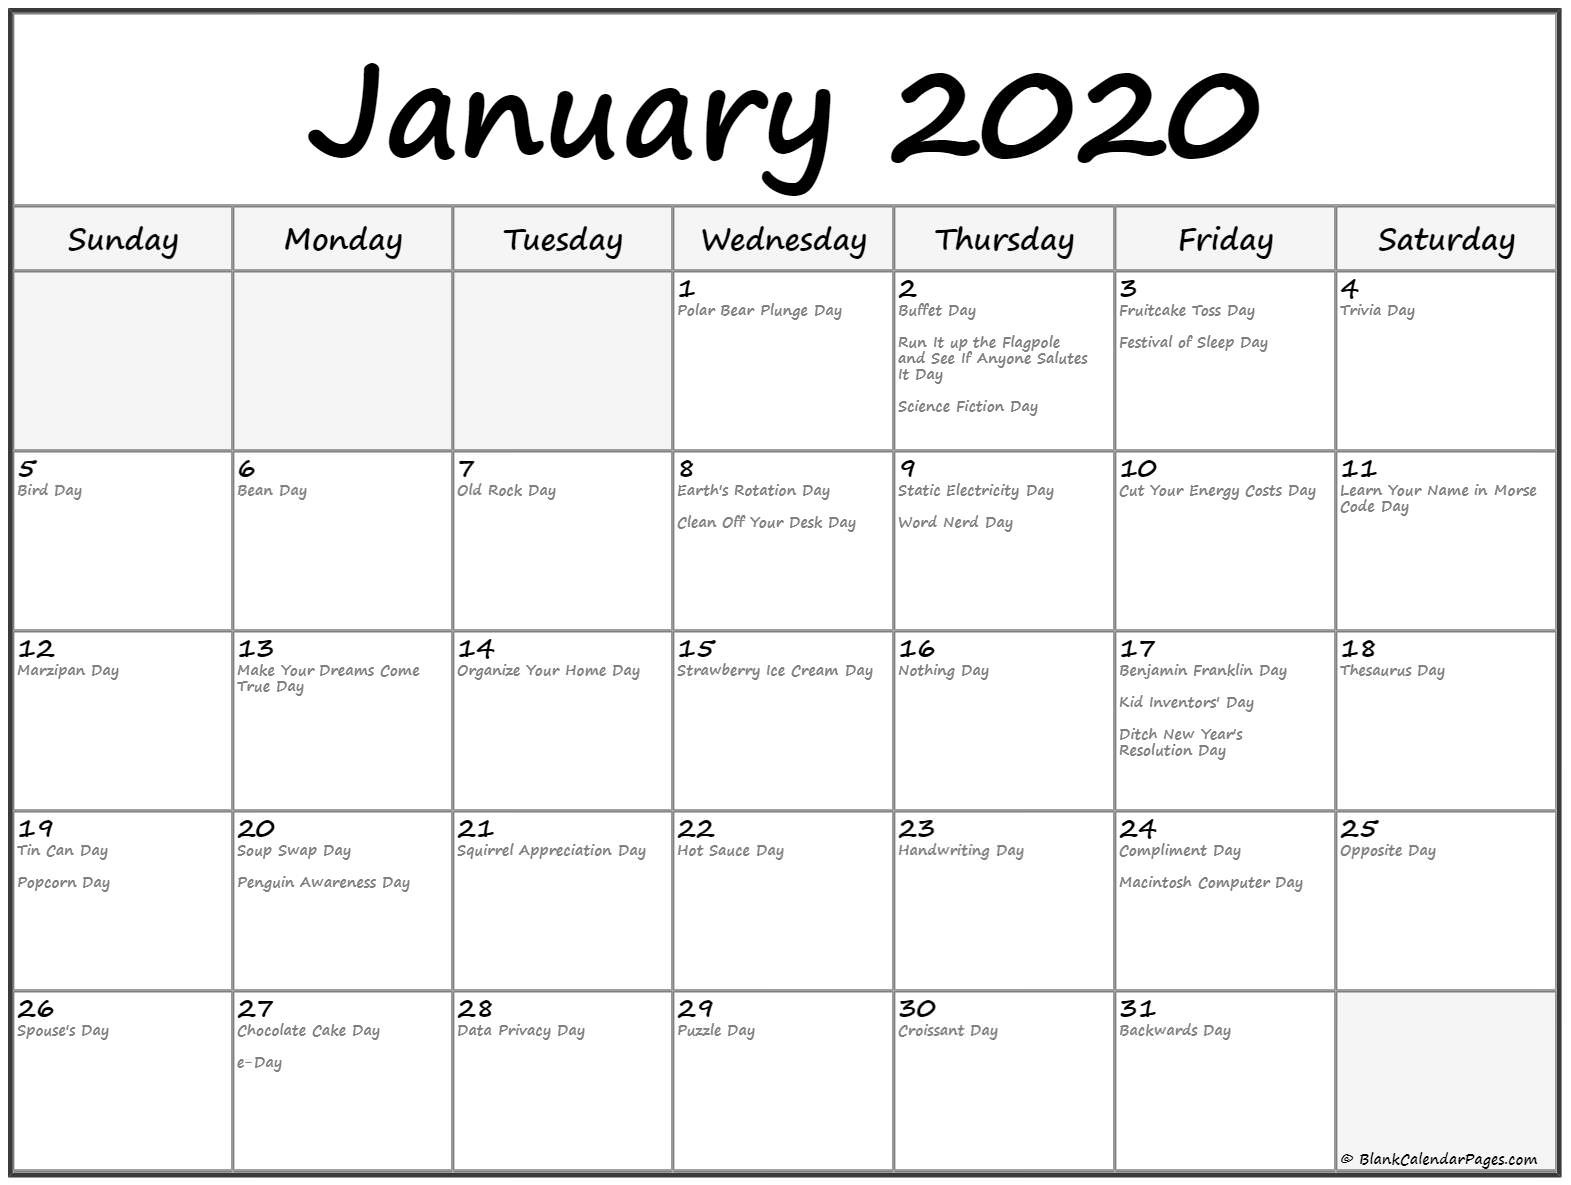 Collection Of January 2020 Calendars With Holidays  2020 Fun National Holiday Calendar